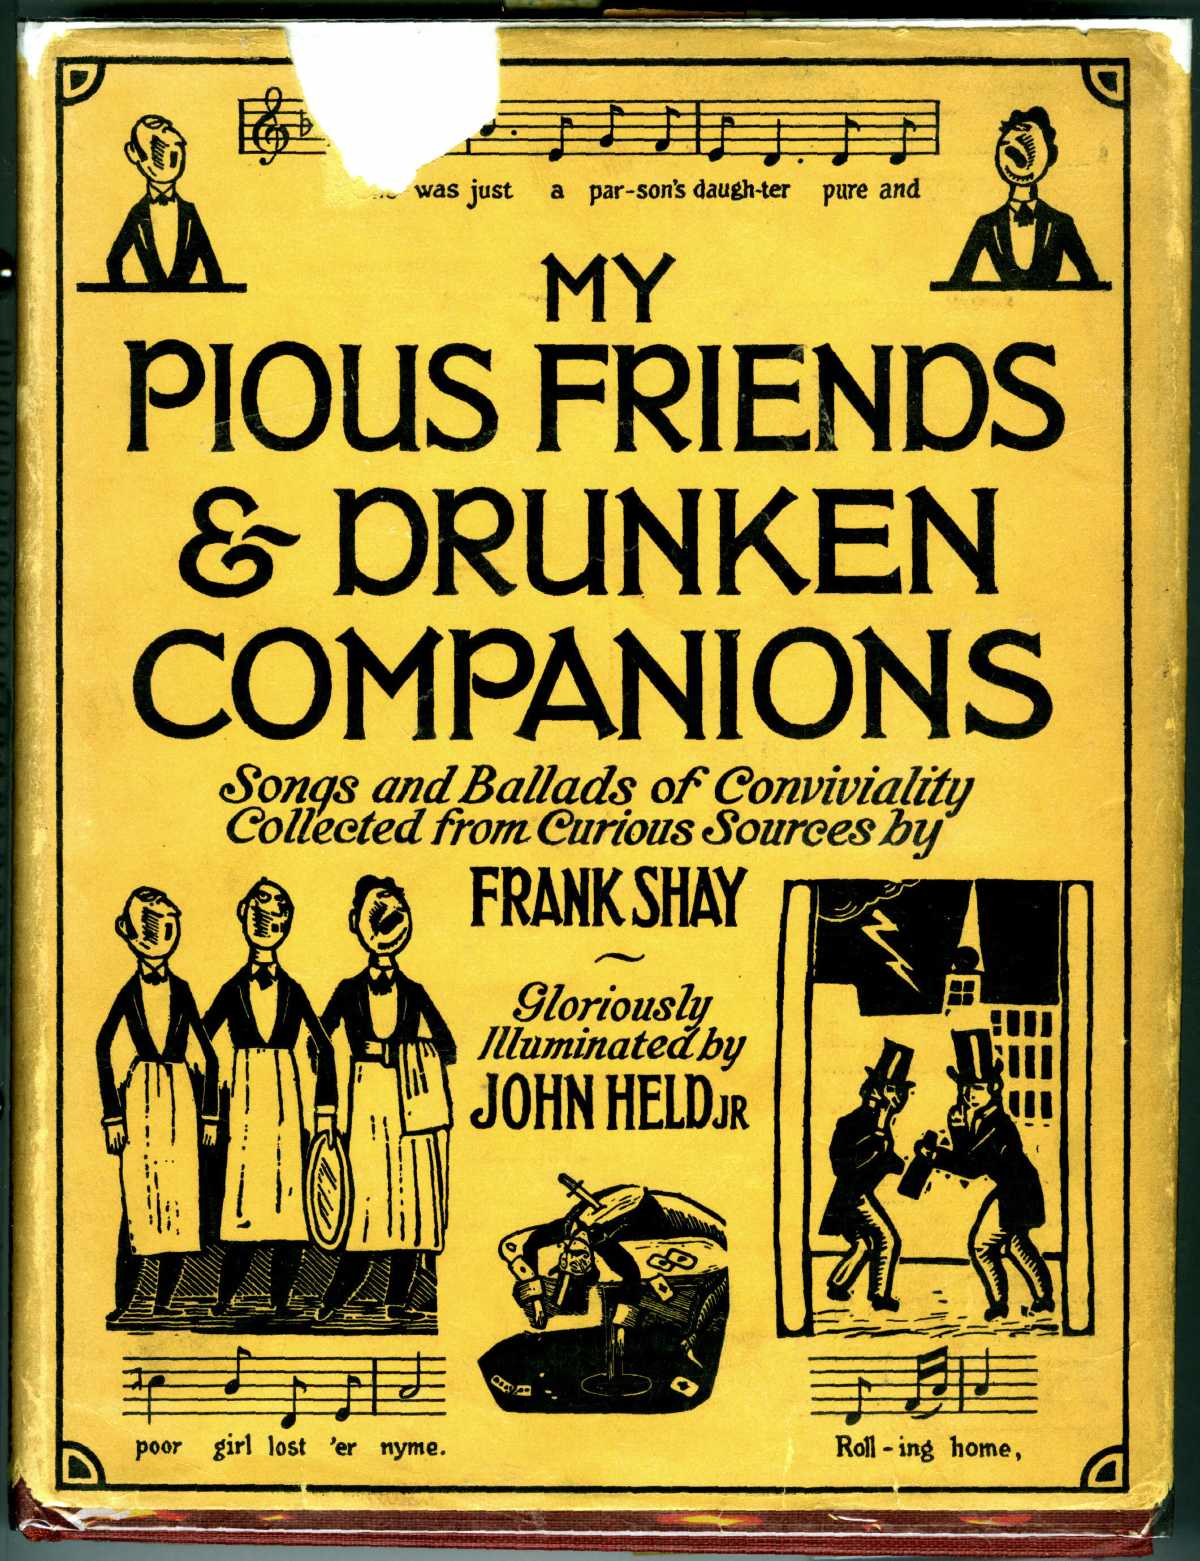 My Pious Friends and Drunken Companions by Frank Shay